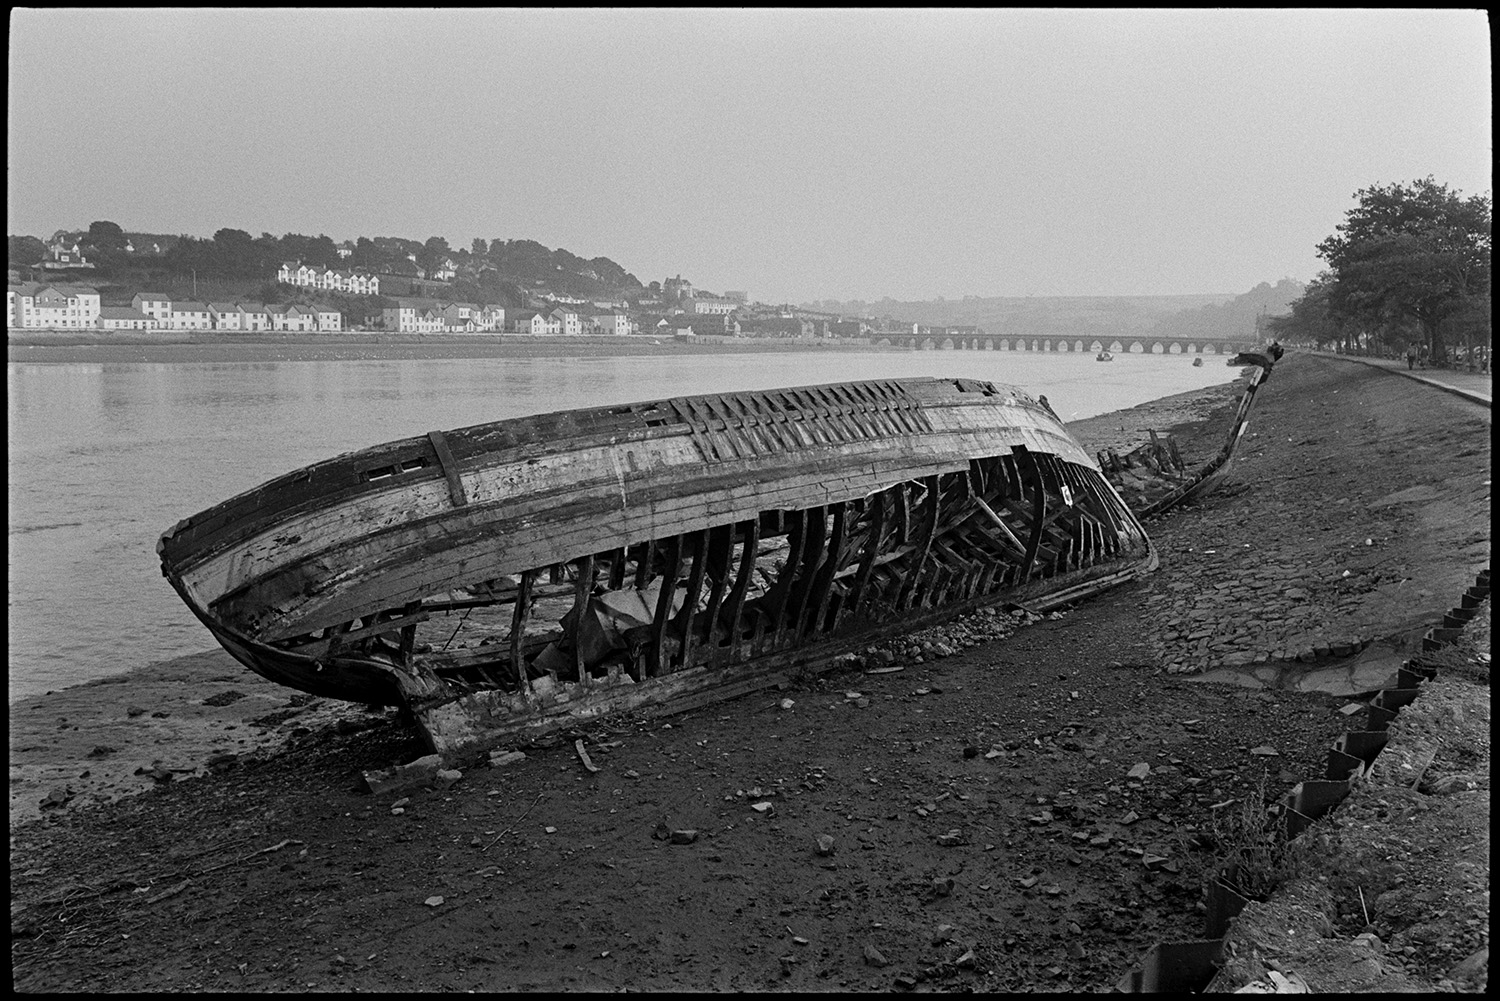 Remains of wooden fishing boat being broken up, new bridge construction behind.
[The remains of an old wooden fishing boat on the banks of the River Torridge. The boat is being broken up. Bideford and Bideford Long Bridge, also known as Bideford Old Bridge is visible in the background.]